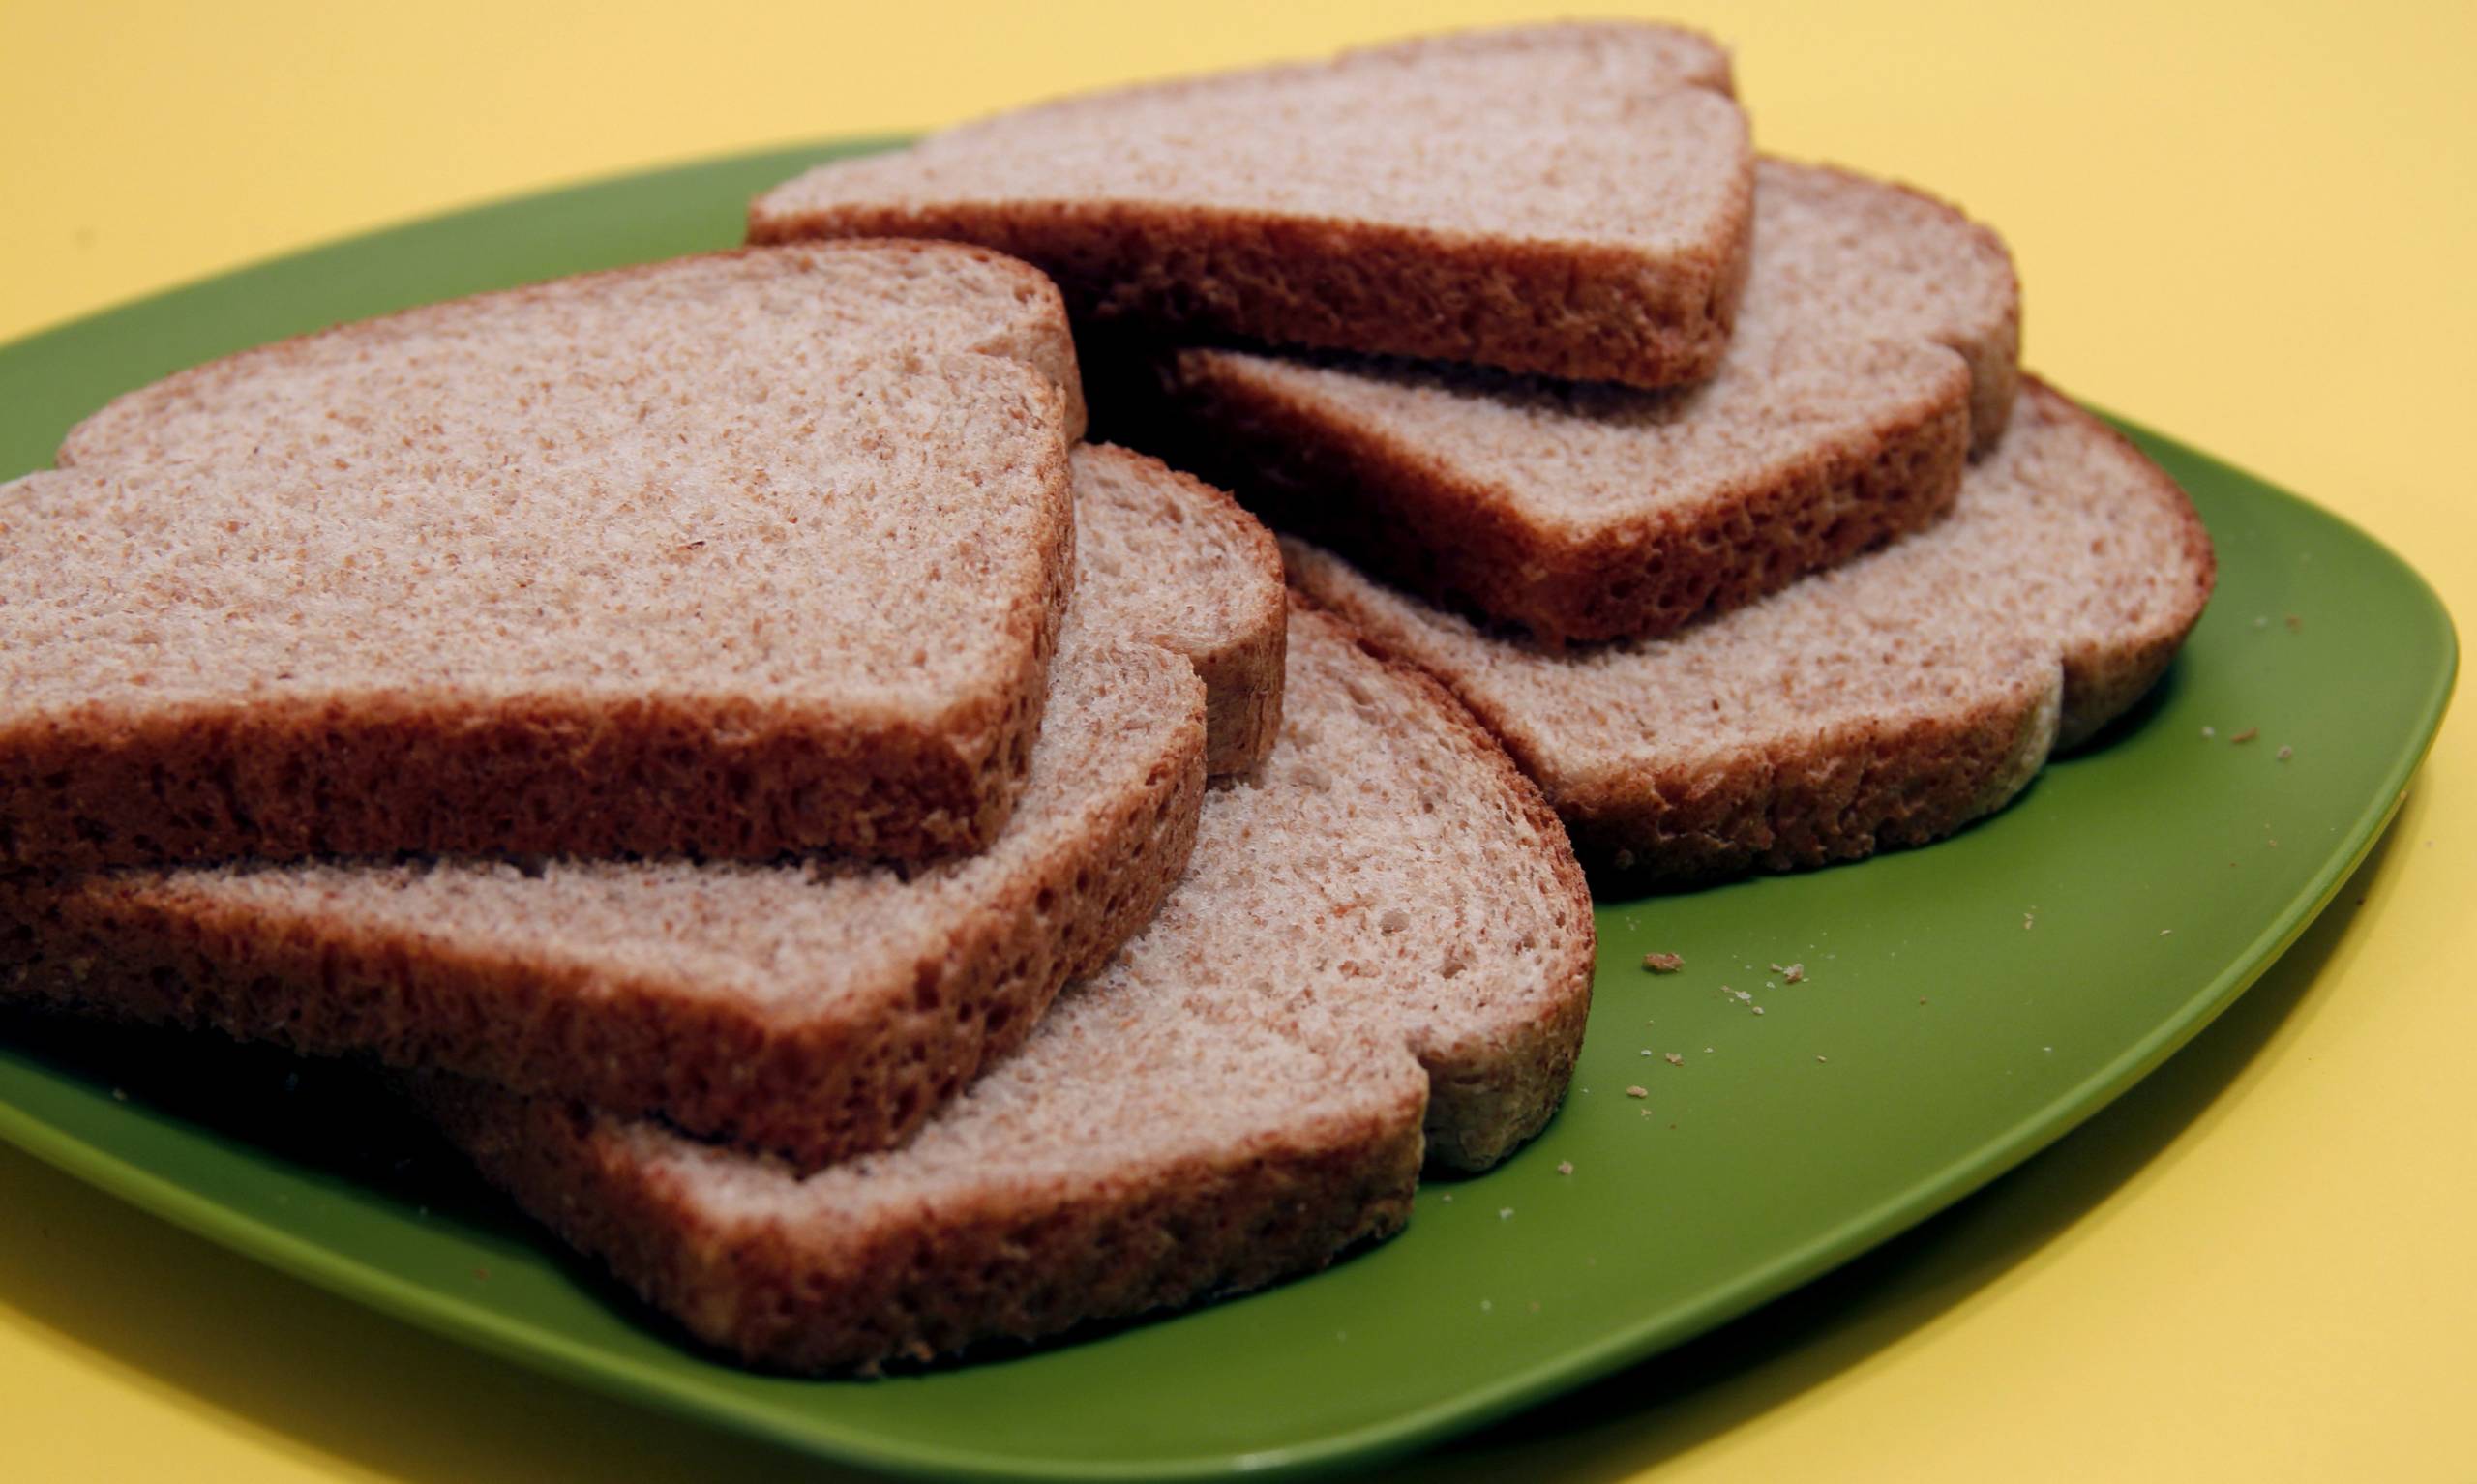 Six slices of whole wheat bread that had been set atop a green p